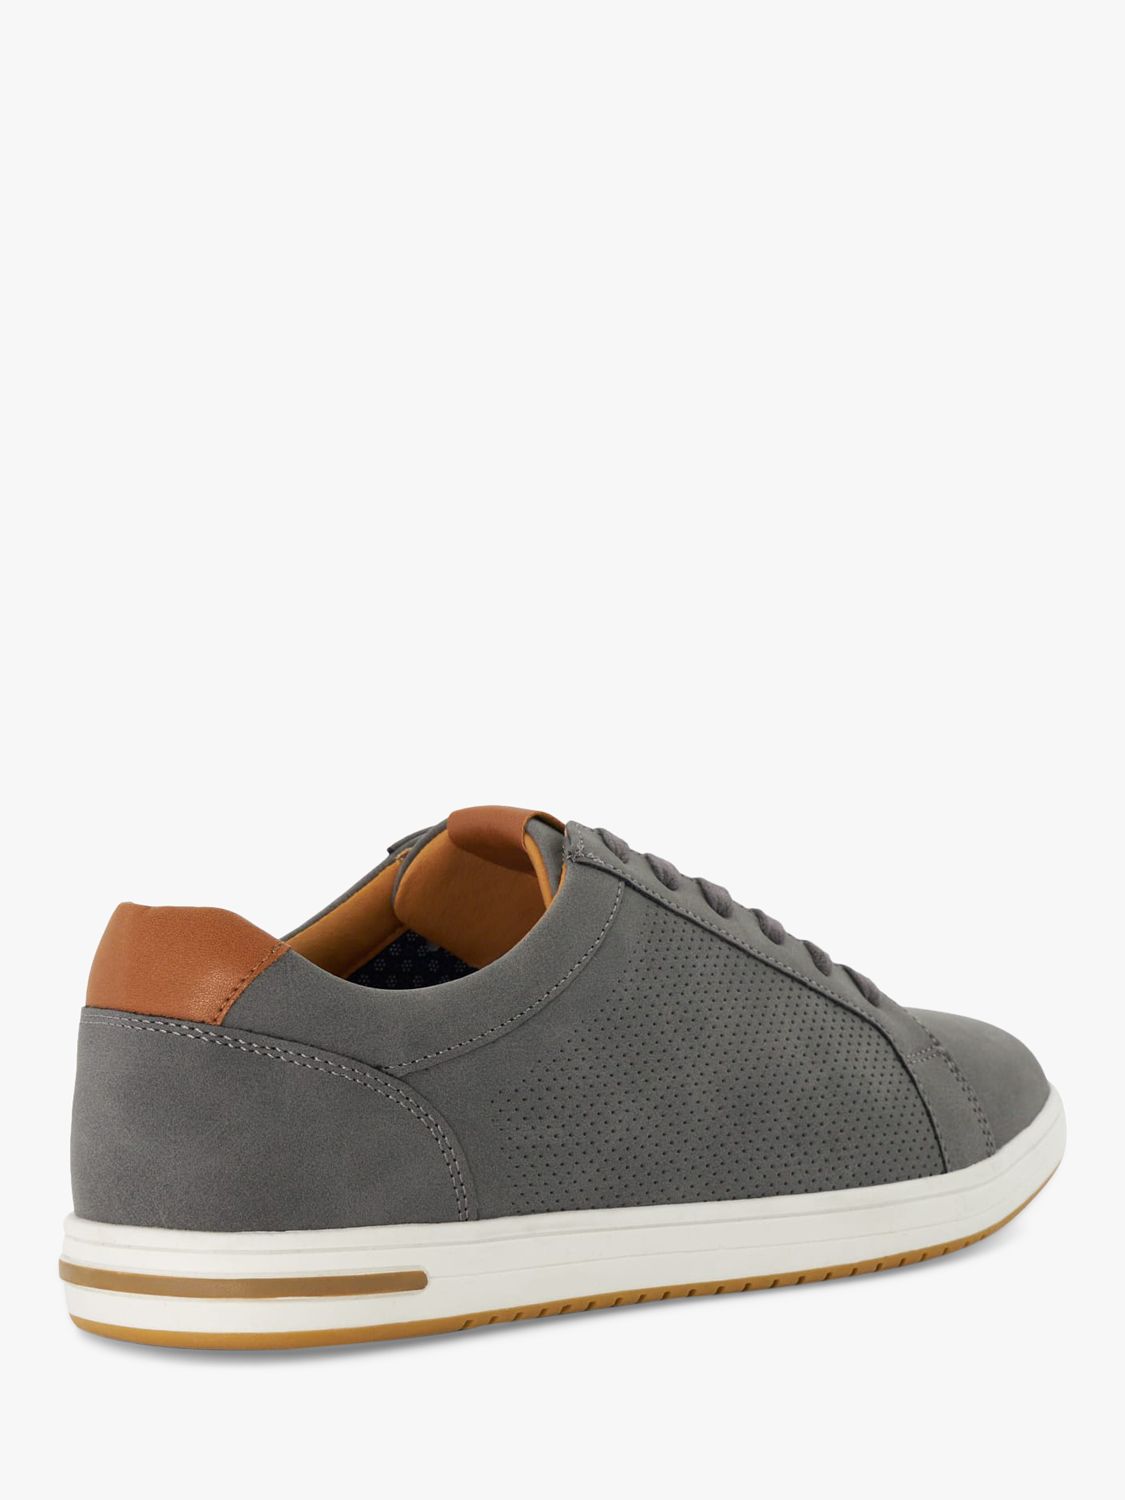 Buy Dune Wide Fit Tezzy Suedette Lace Up Trainers, Grey Online at johnlewis.com